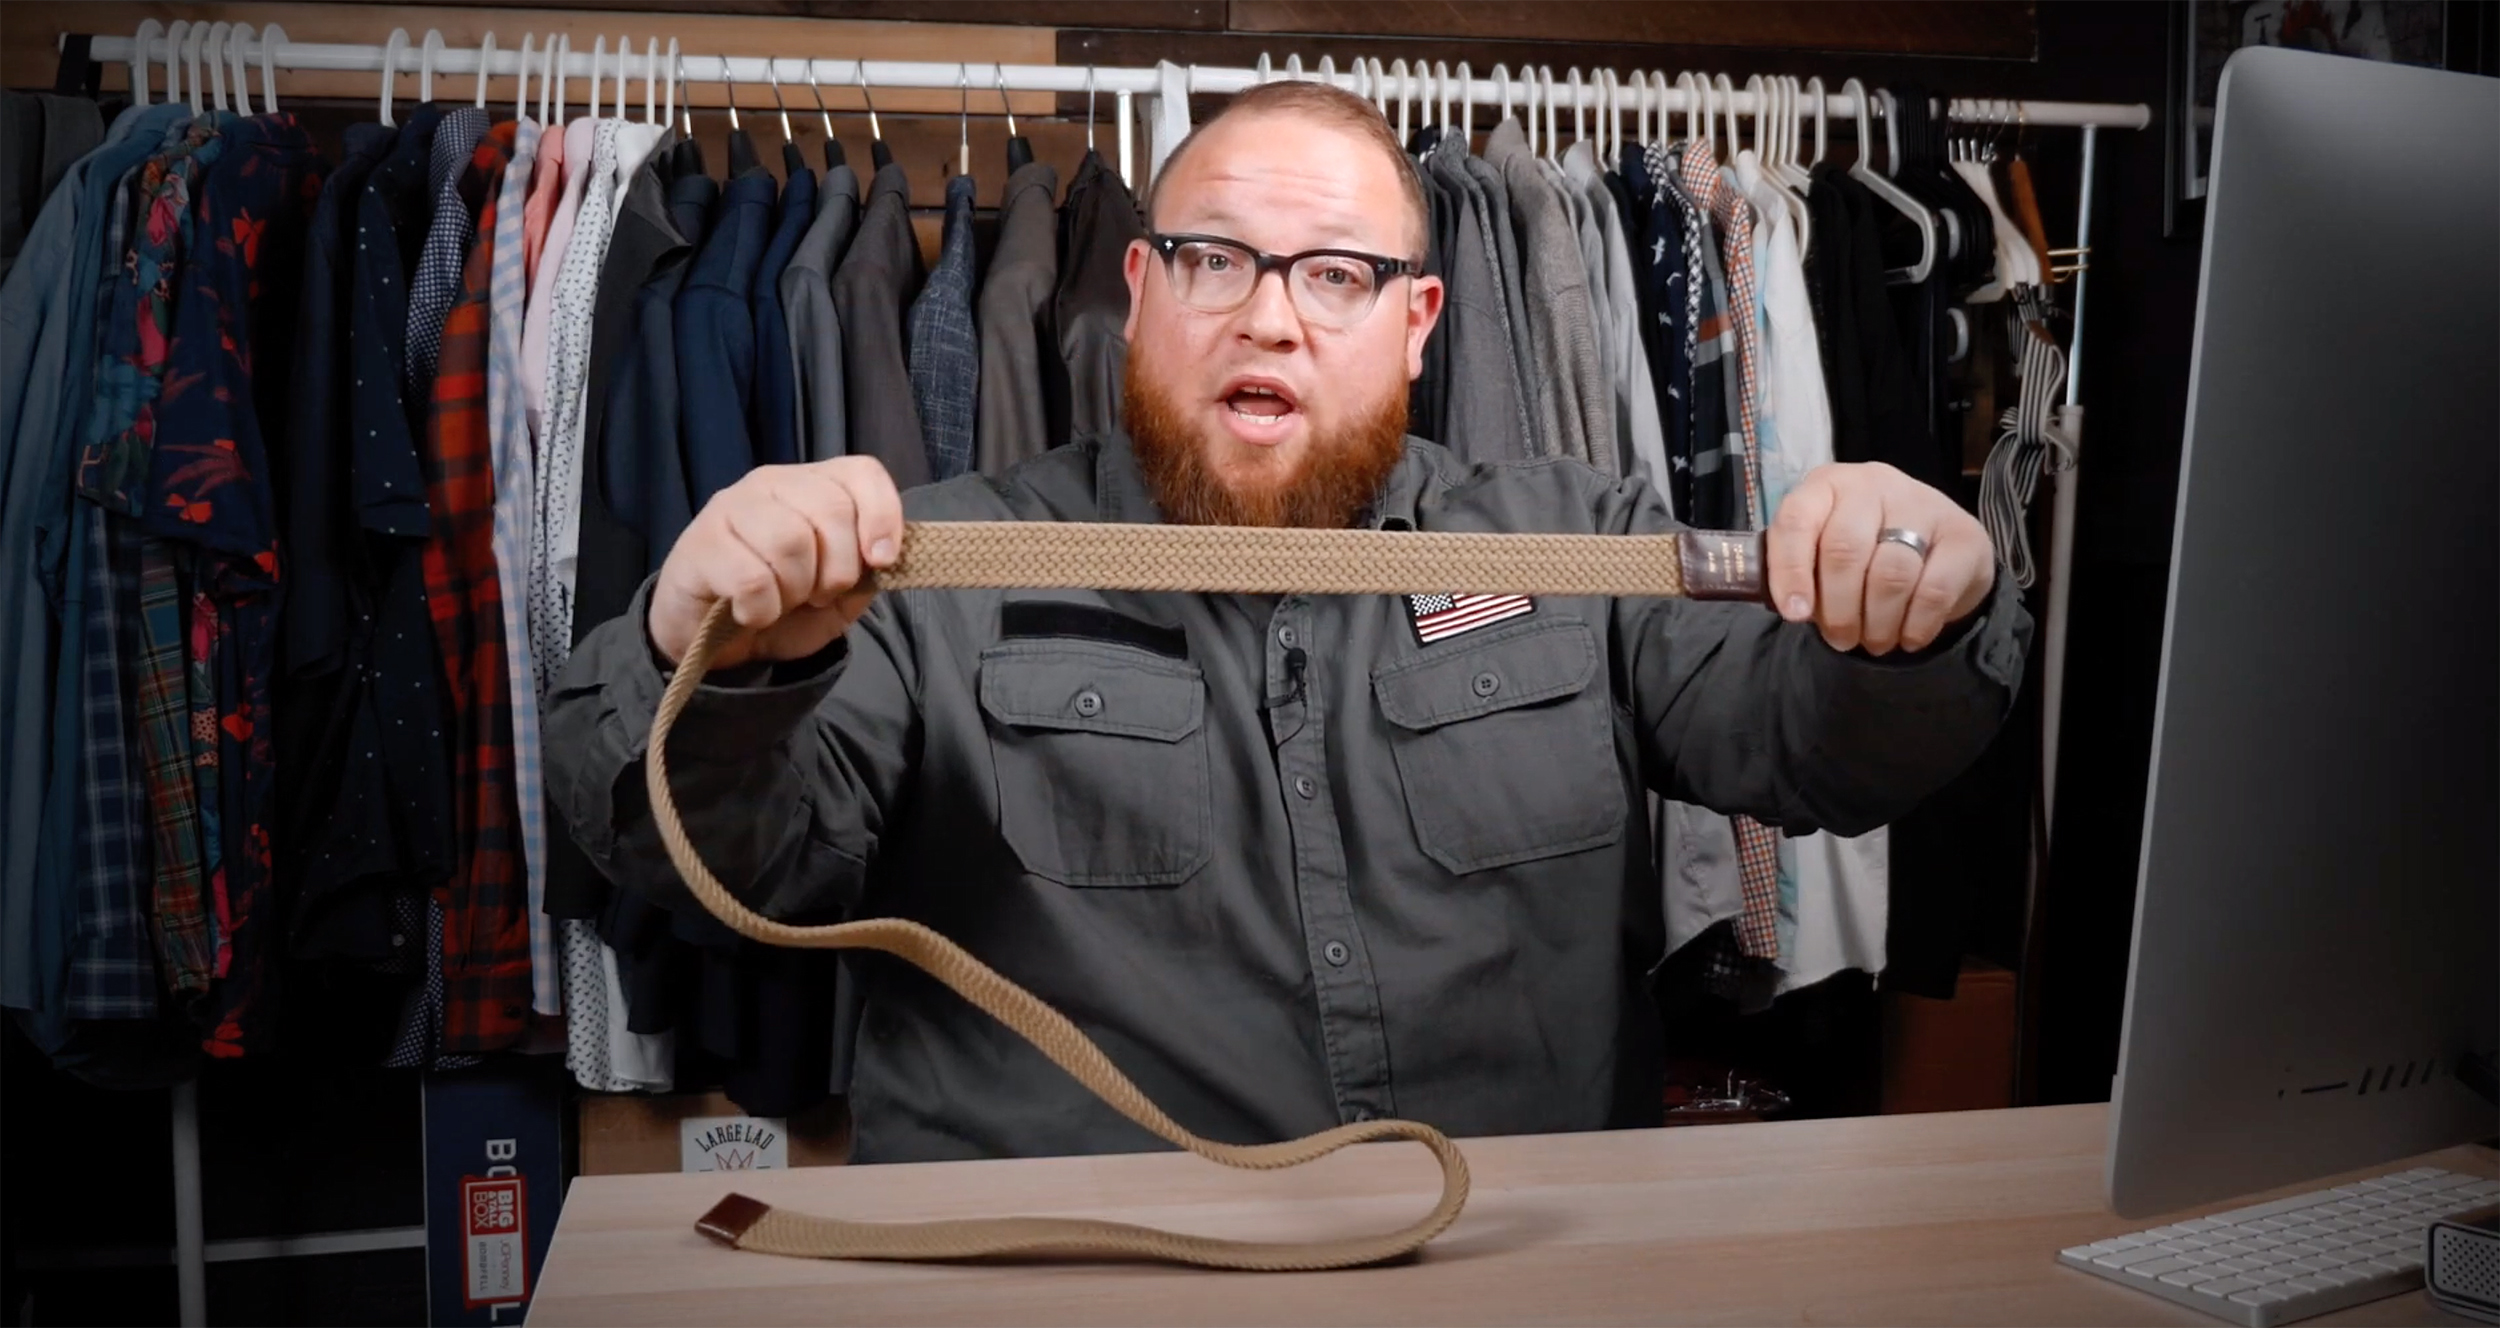 Answerland: Belts and Chafing